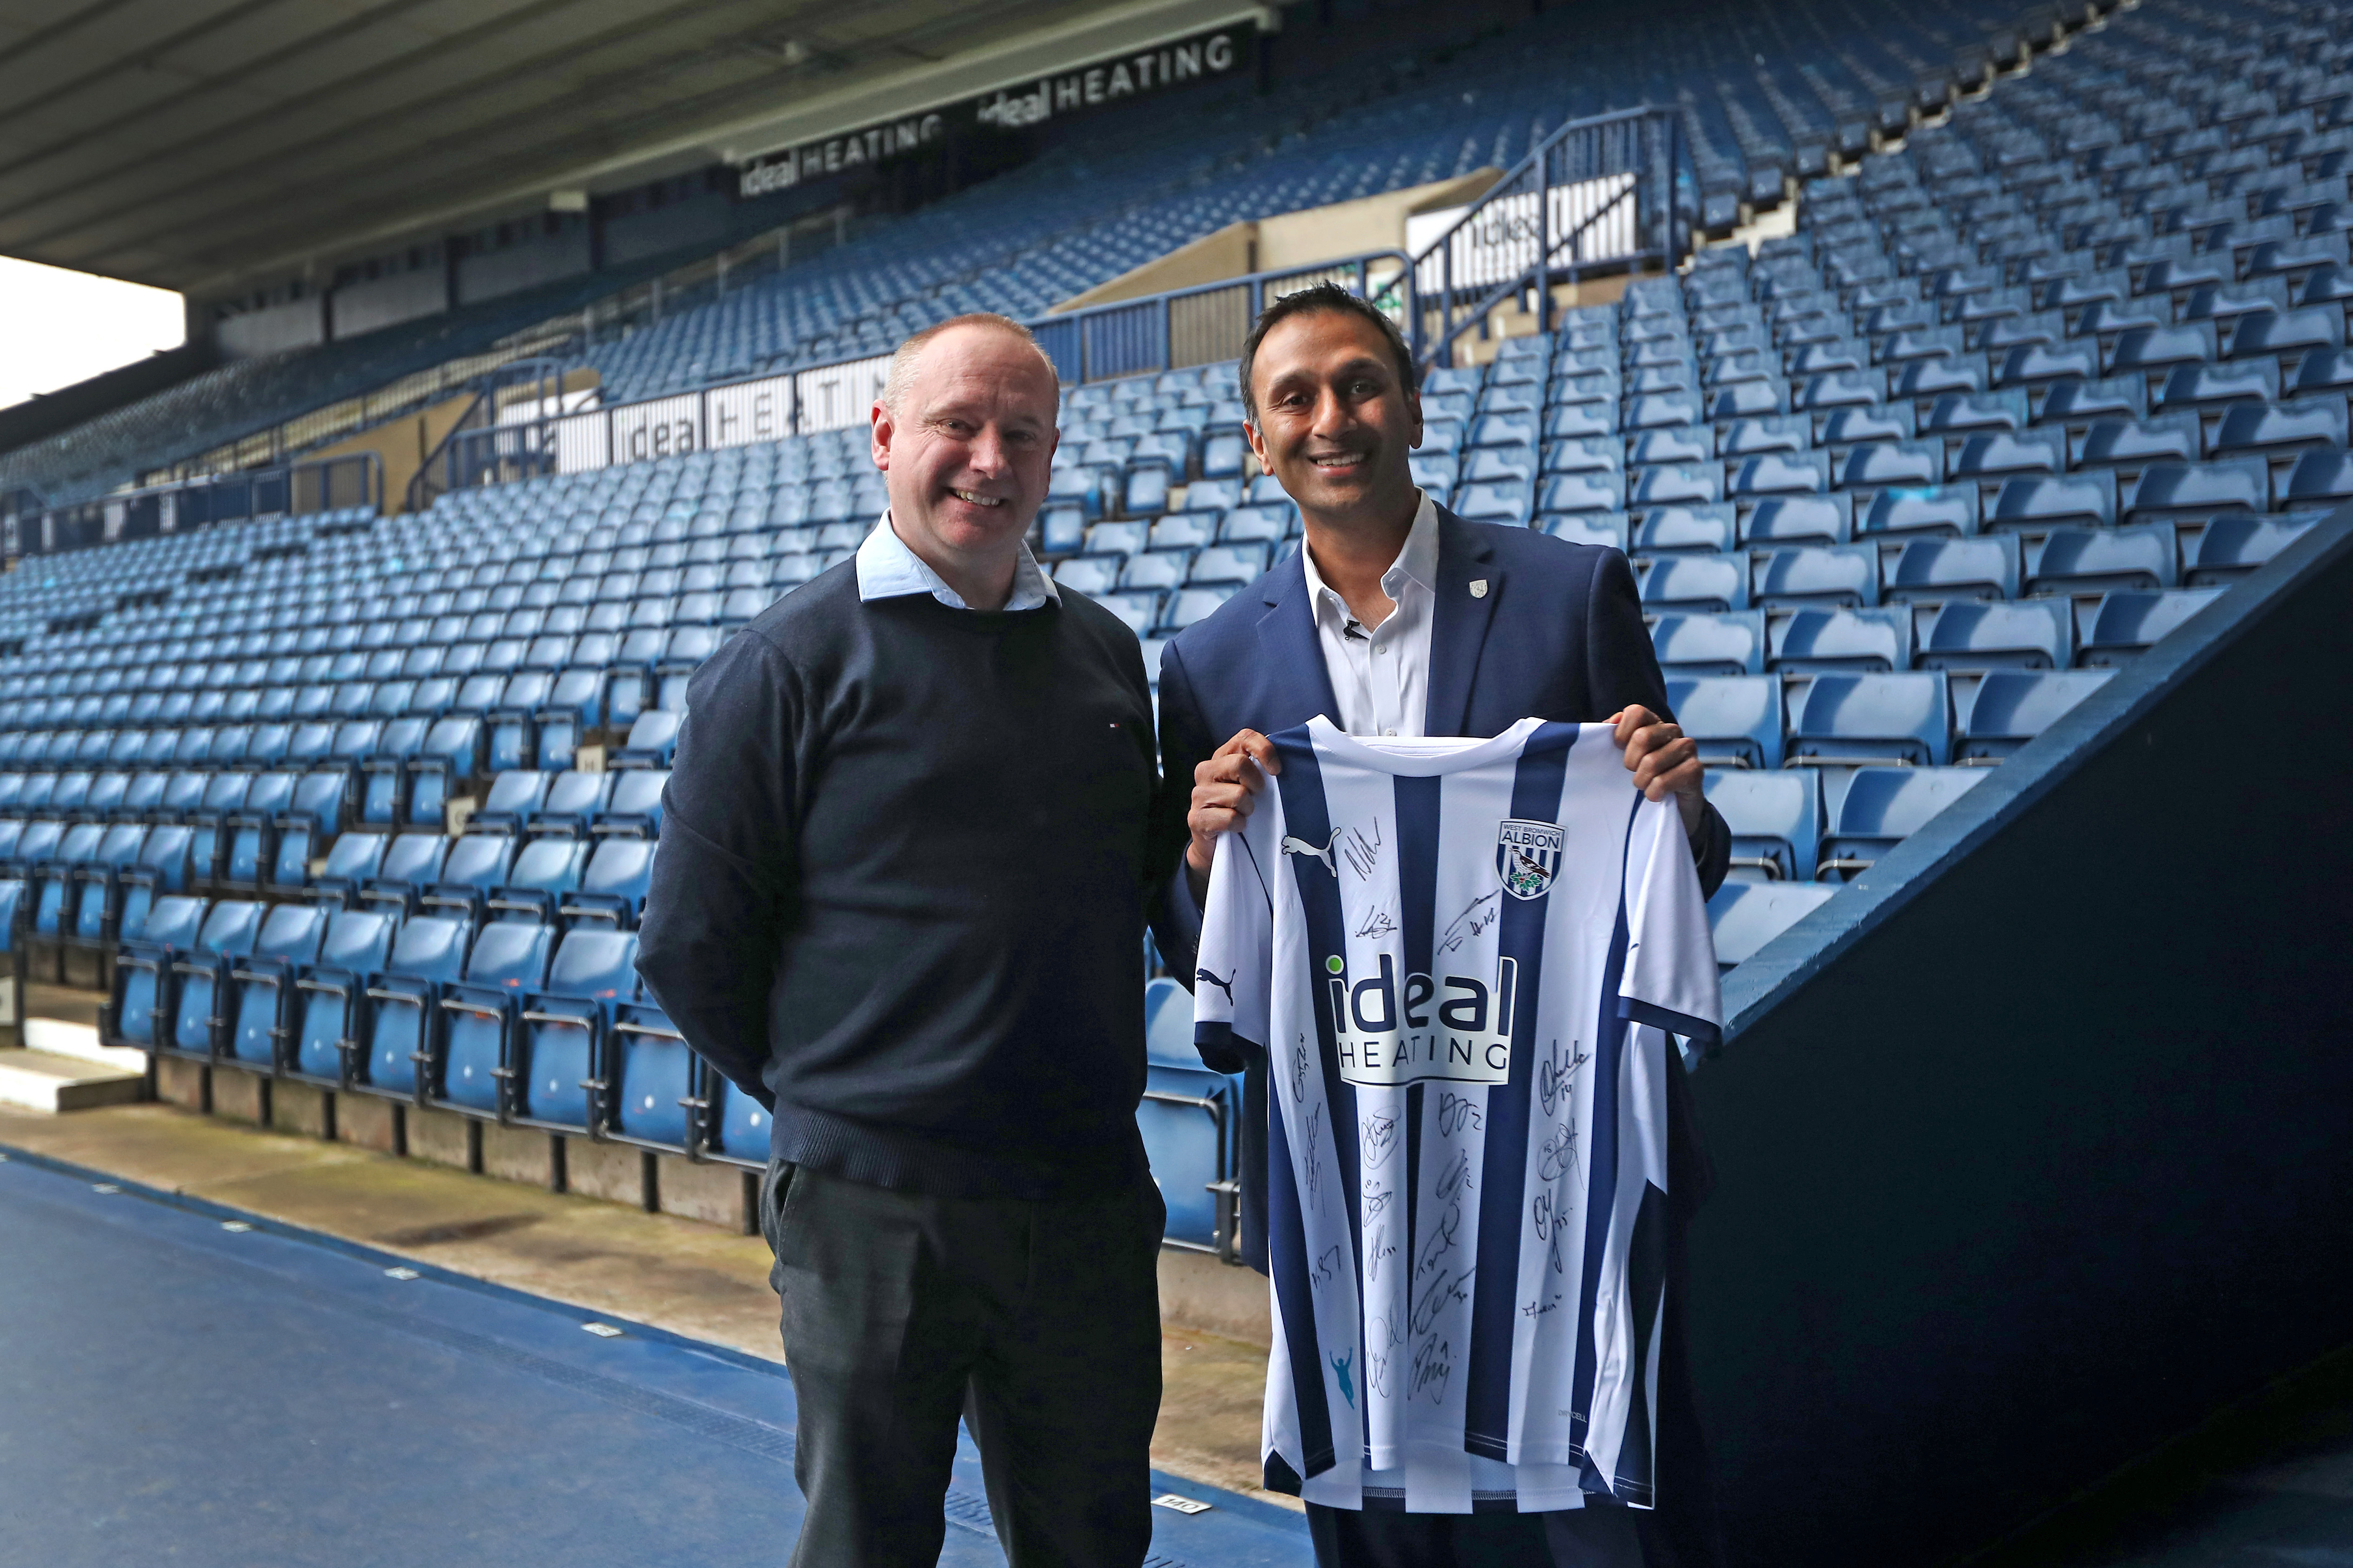 Shilen Patel poses for a photo with West Bromwich Albion's Managing Director Mark Miles while smiling and holding up a home Albion shirt